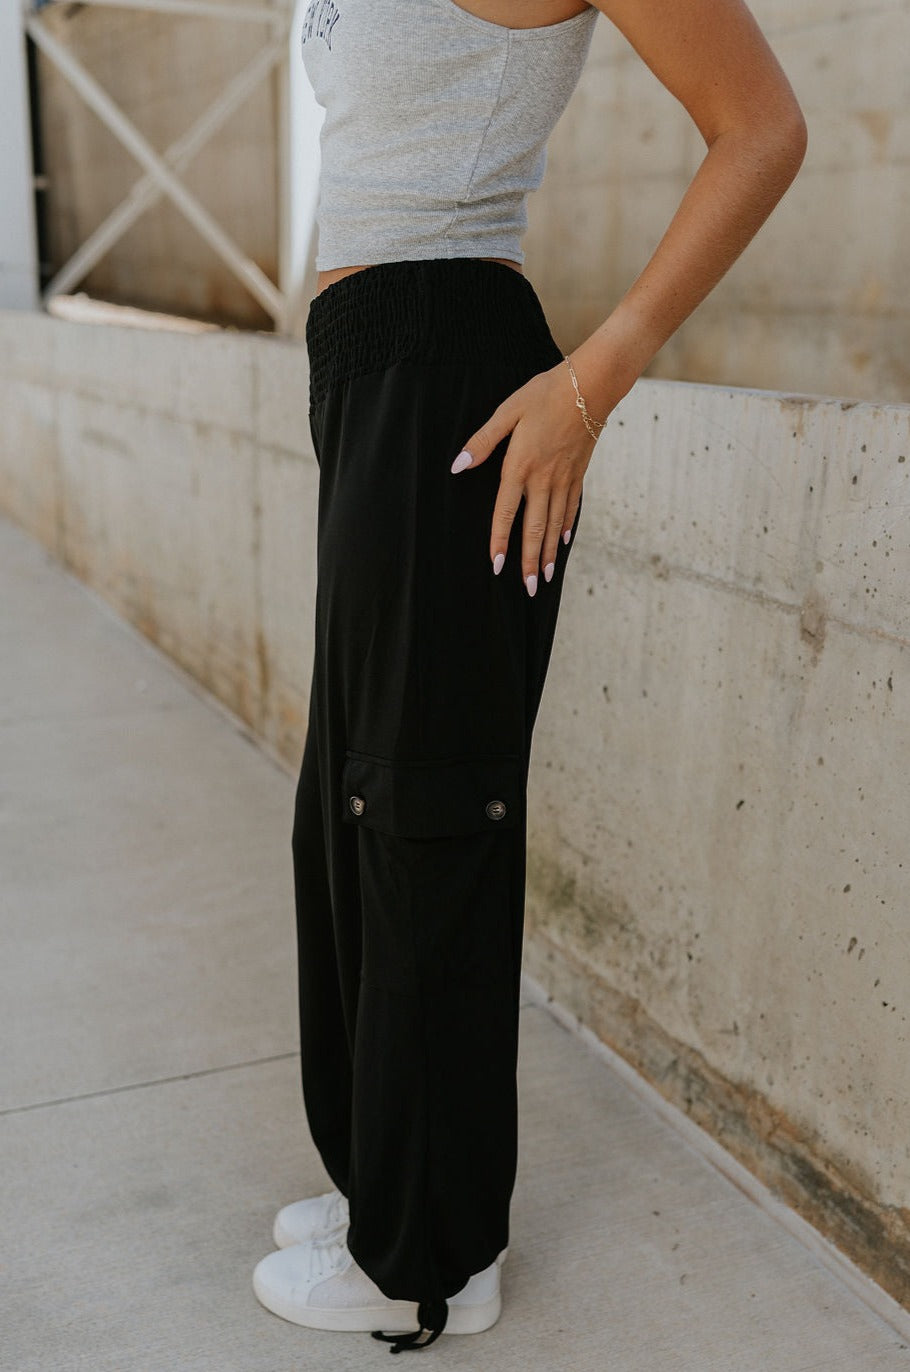 side view of female model wearing the Serena Black Cargo Drawstring Pants which features Black Lightweight Fabric, Jogger Pant Legs with Drawstring Ties, Cargo Pockets with Tortoise Buttons and Smocked Elastic Waistband